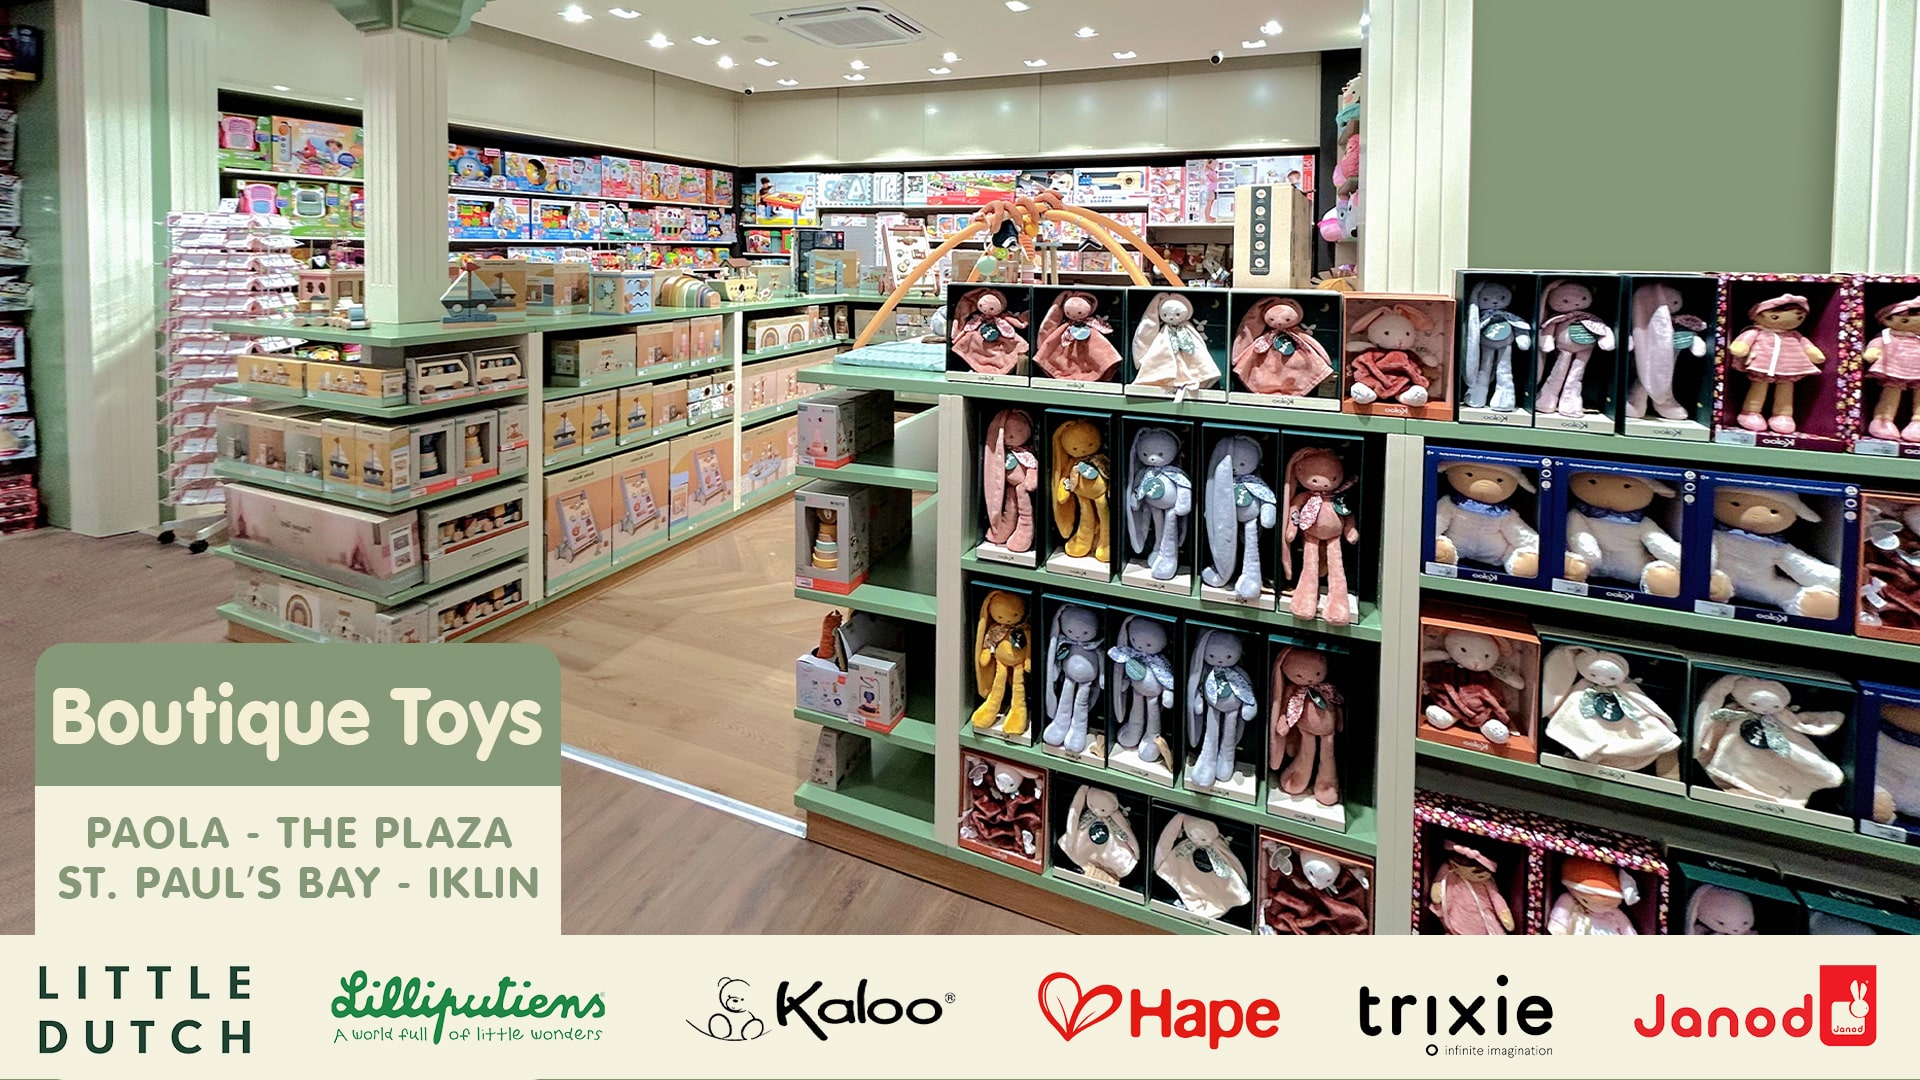 Specialty boutique toys arranged on shelving units, featuring soft dolls and learning games.